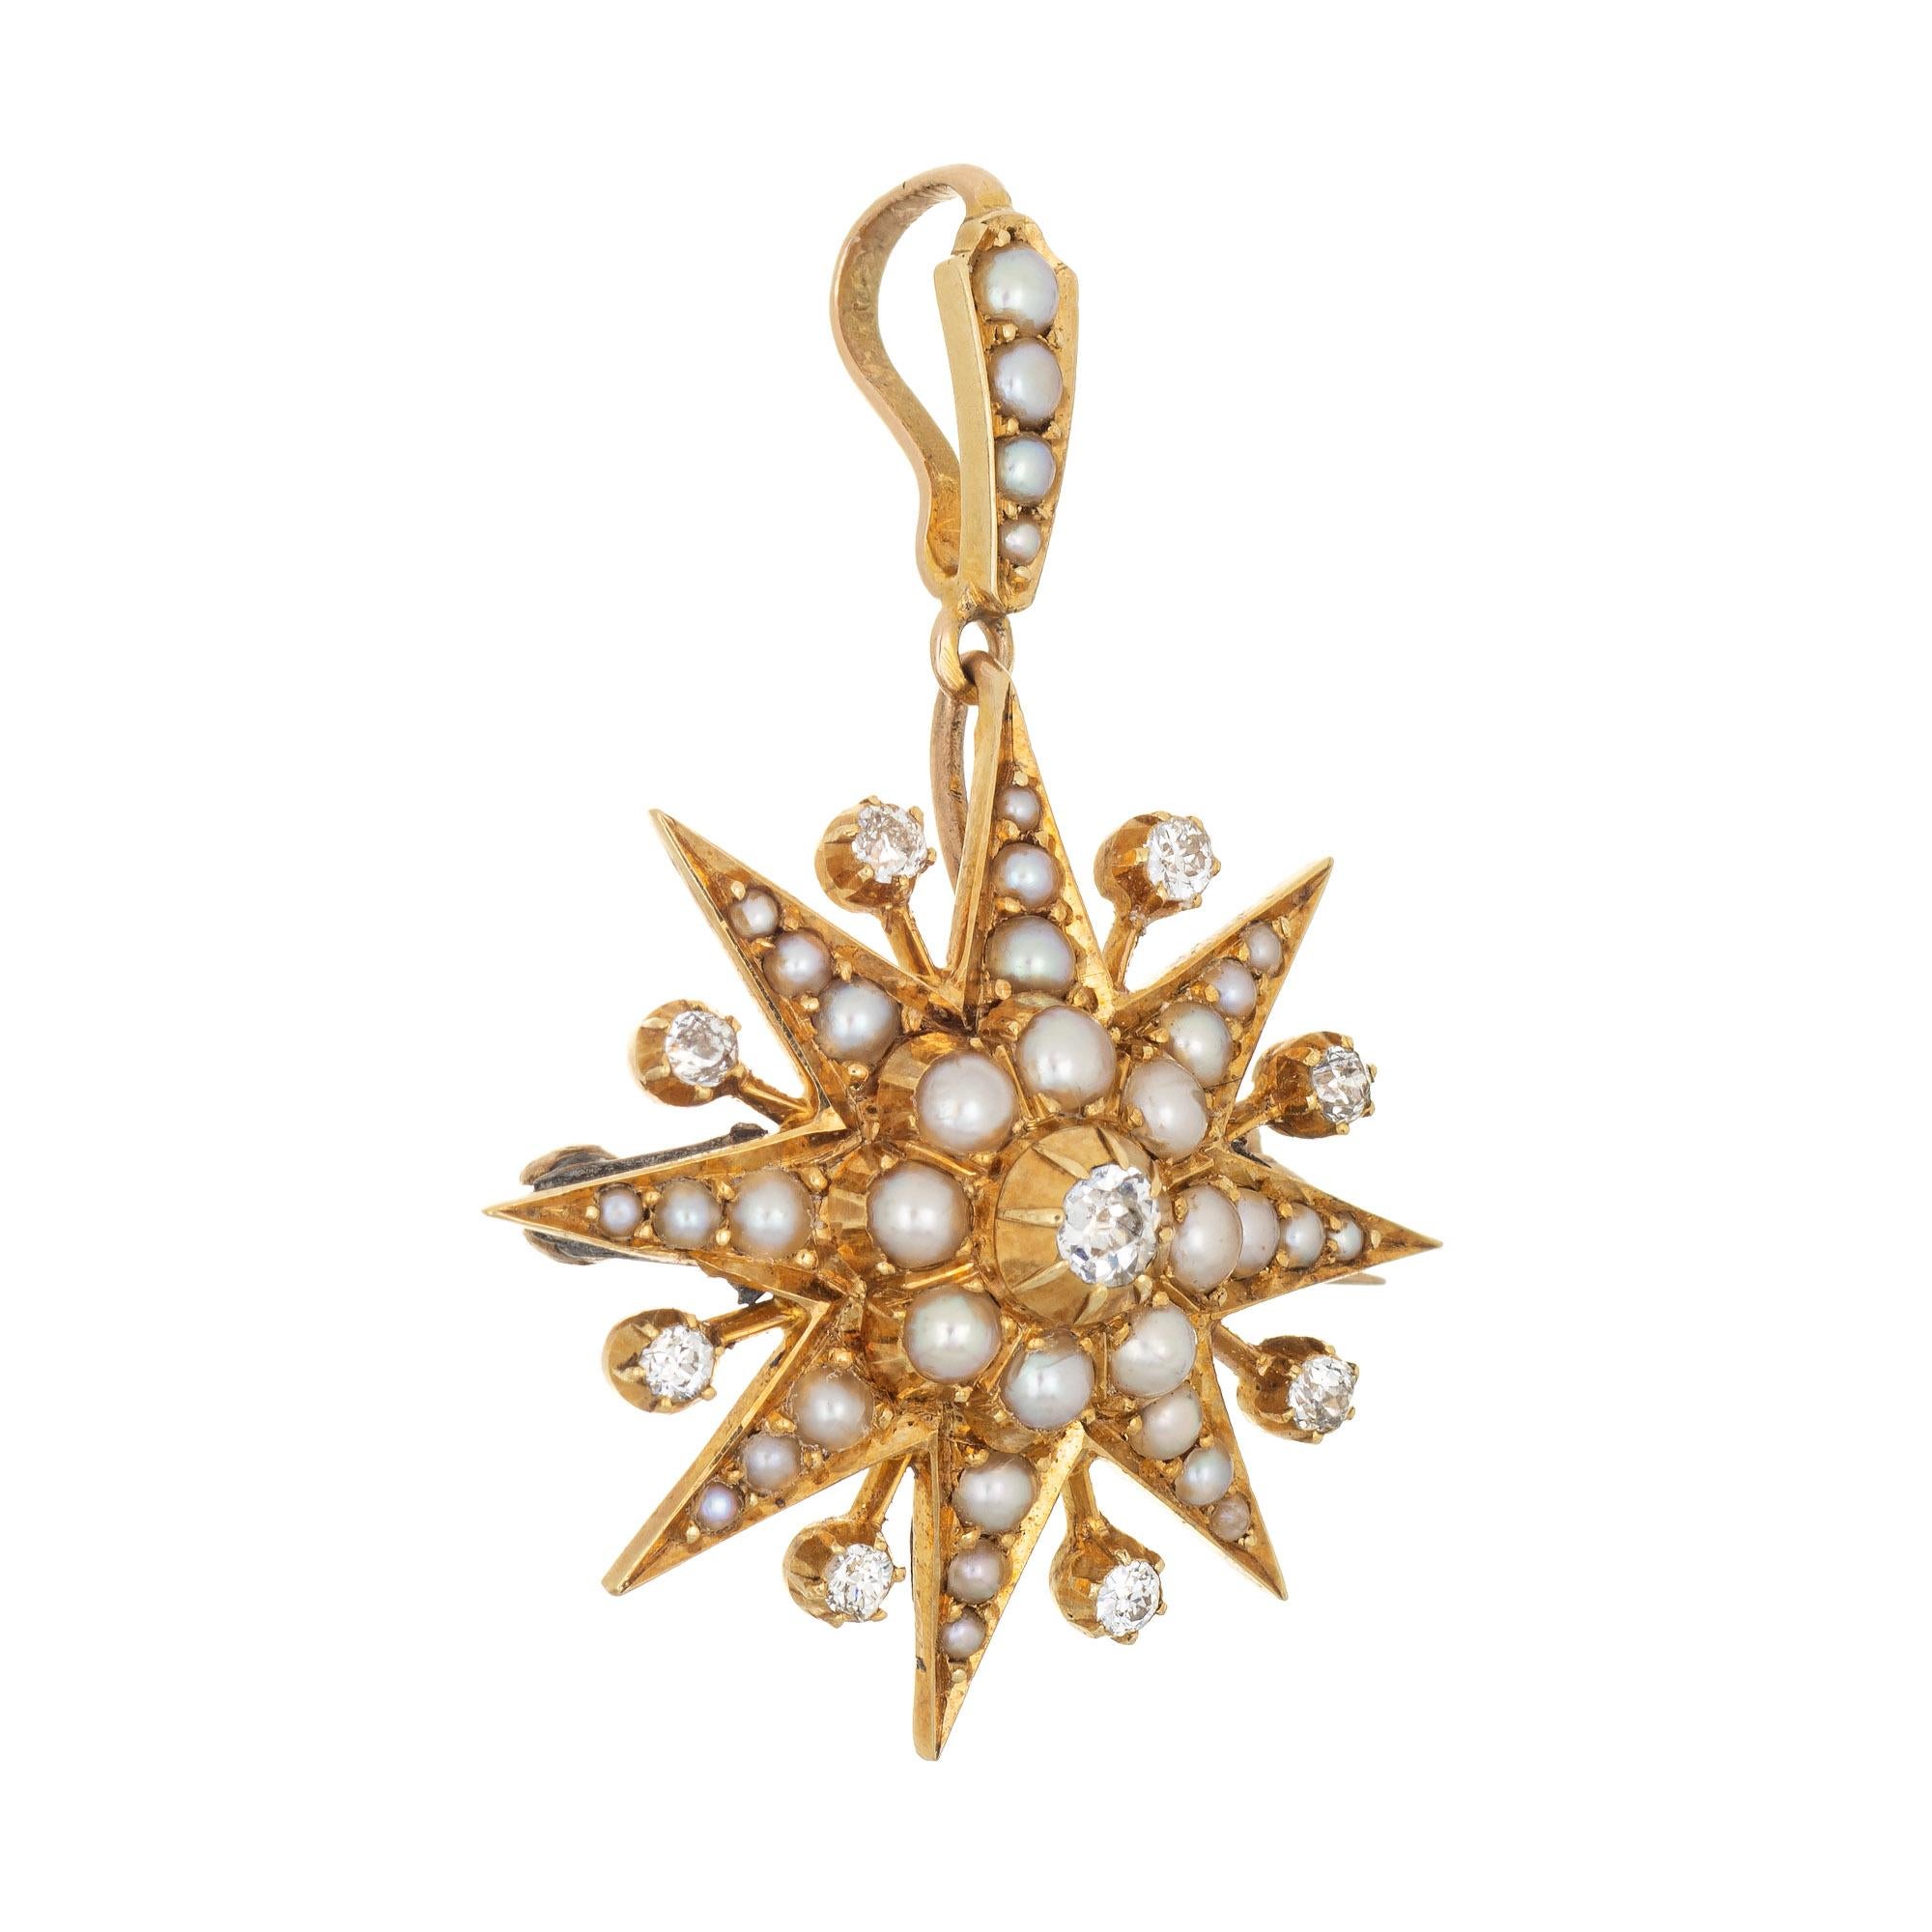 Elaborate antique Victorian starburst pendant (circa 1880s to 1900s) crafted in 18 karat yellow gold. 

Old mine cut diamonds total an estimated 0.30 carats (estimated at I-J color and SI1-2 clarity). The pearls range in size from 1mm to 2.5mm.